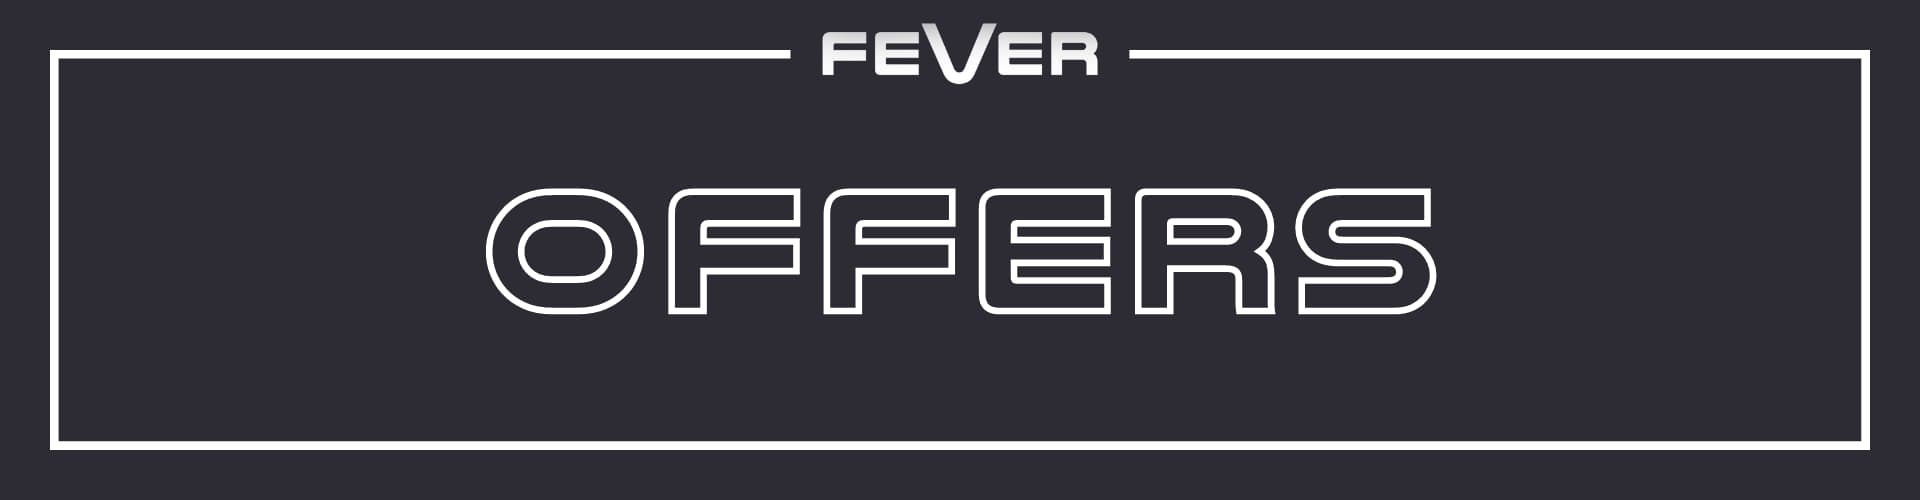 Offers at Fever